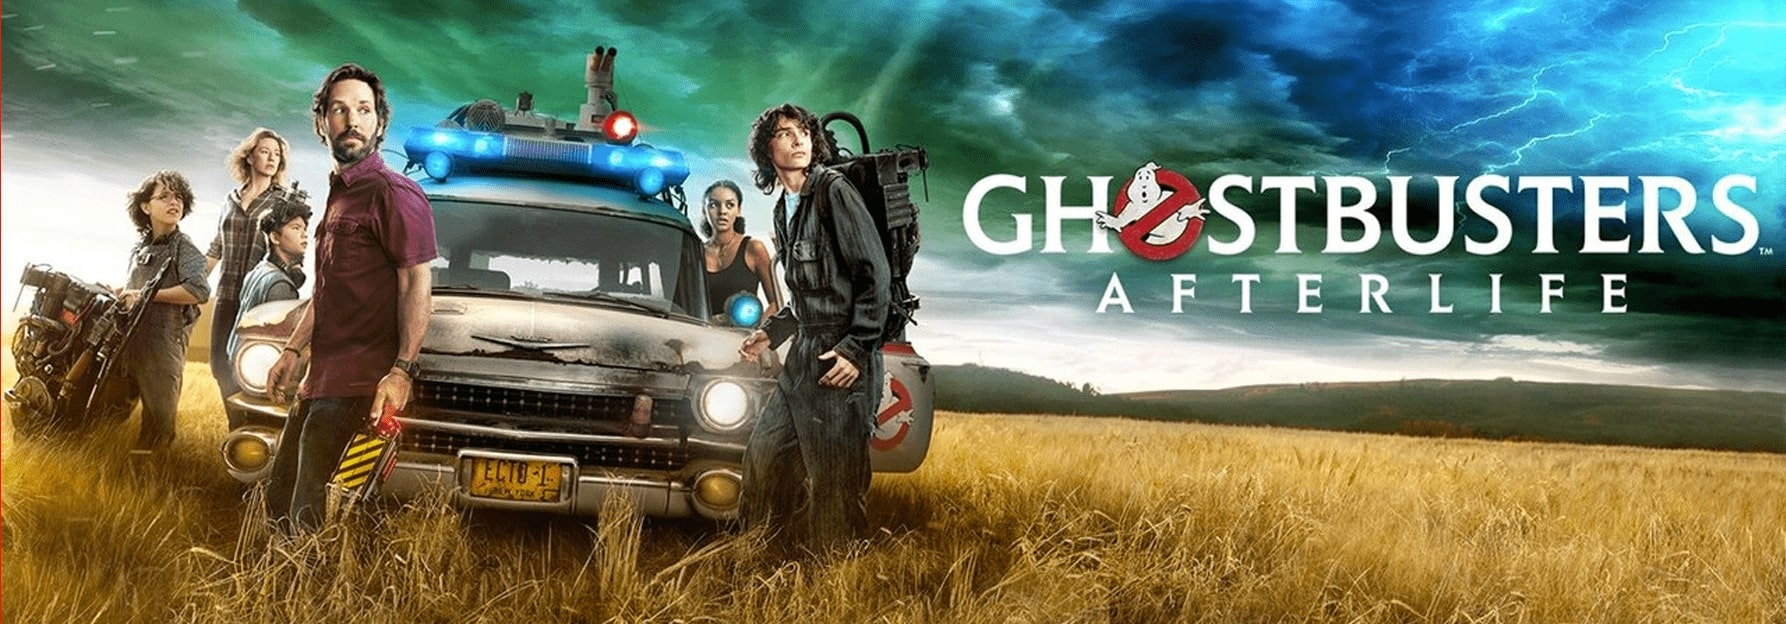 Ghostbusters After Life Banner